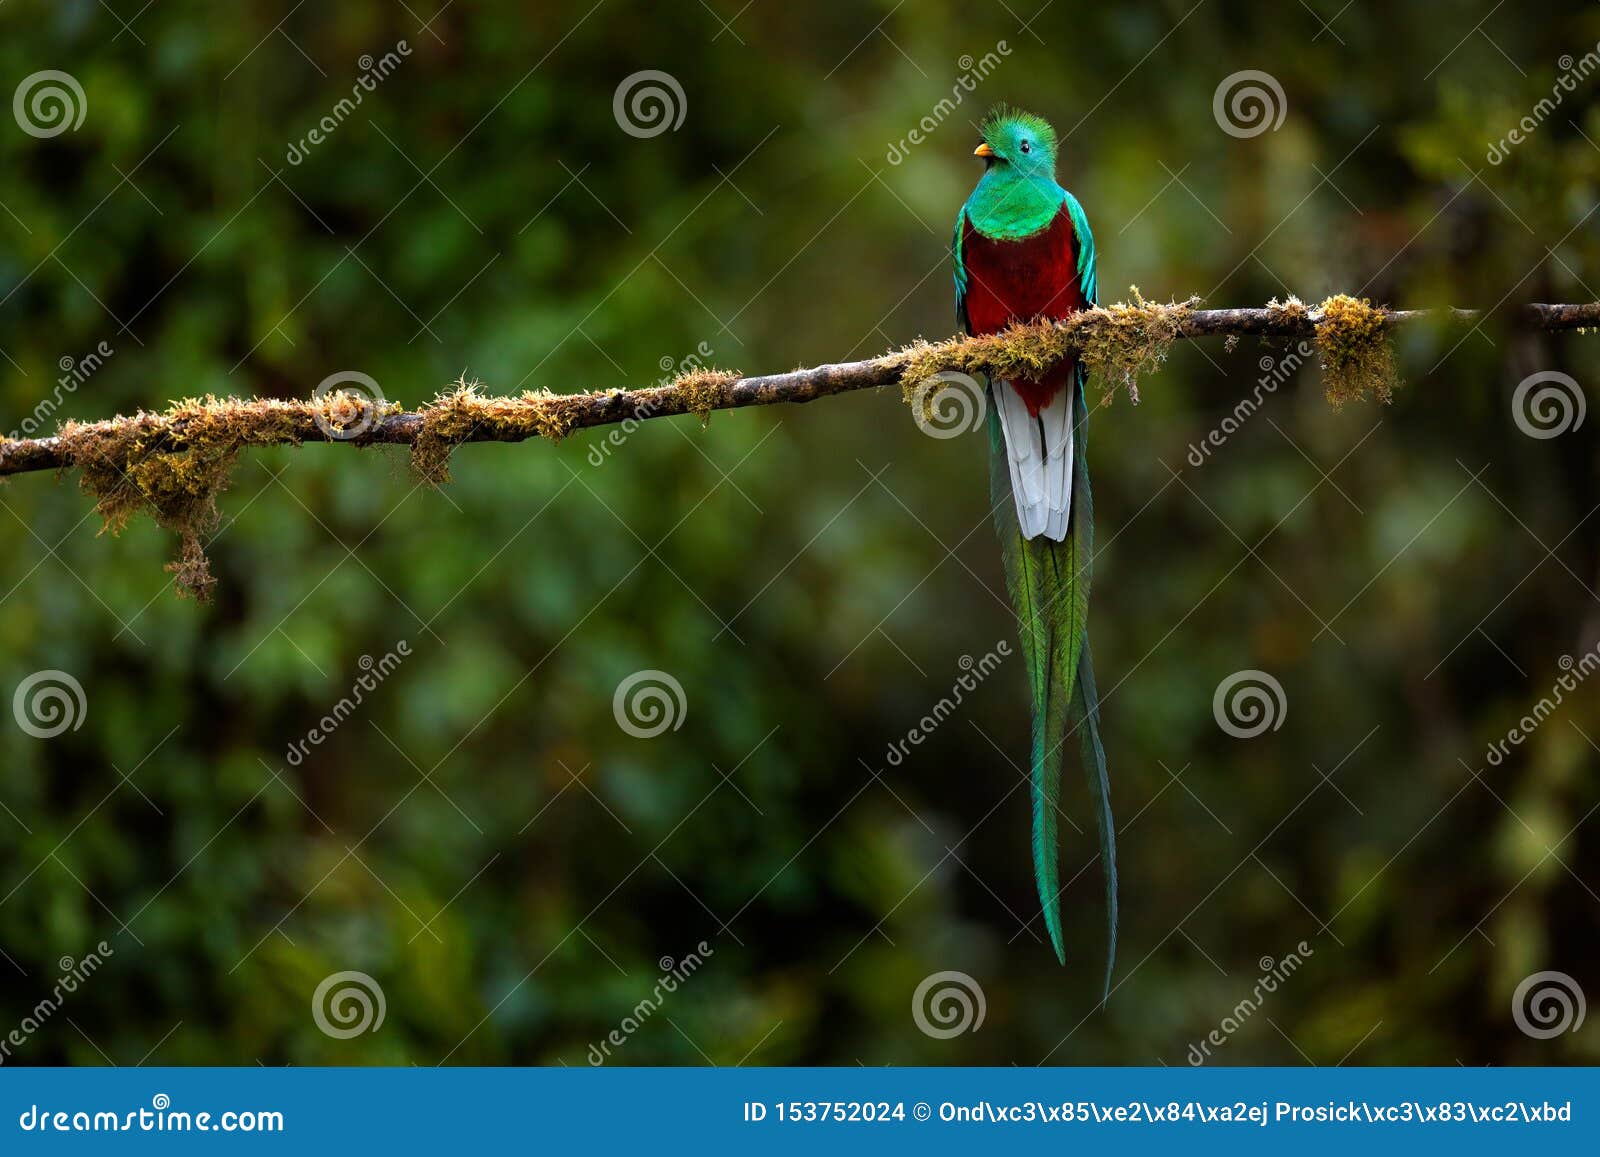 resplendent quetzal, pharomachrus mocinno, from savegre in costa rica with blurred green forest in background. magnificent sacred